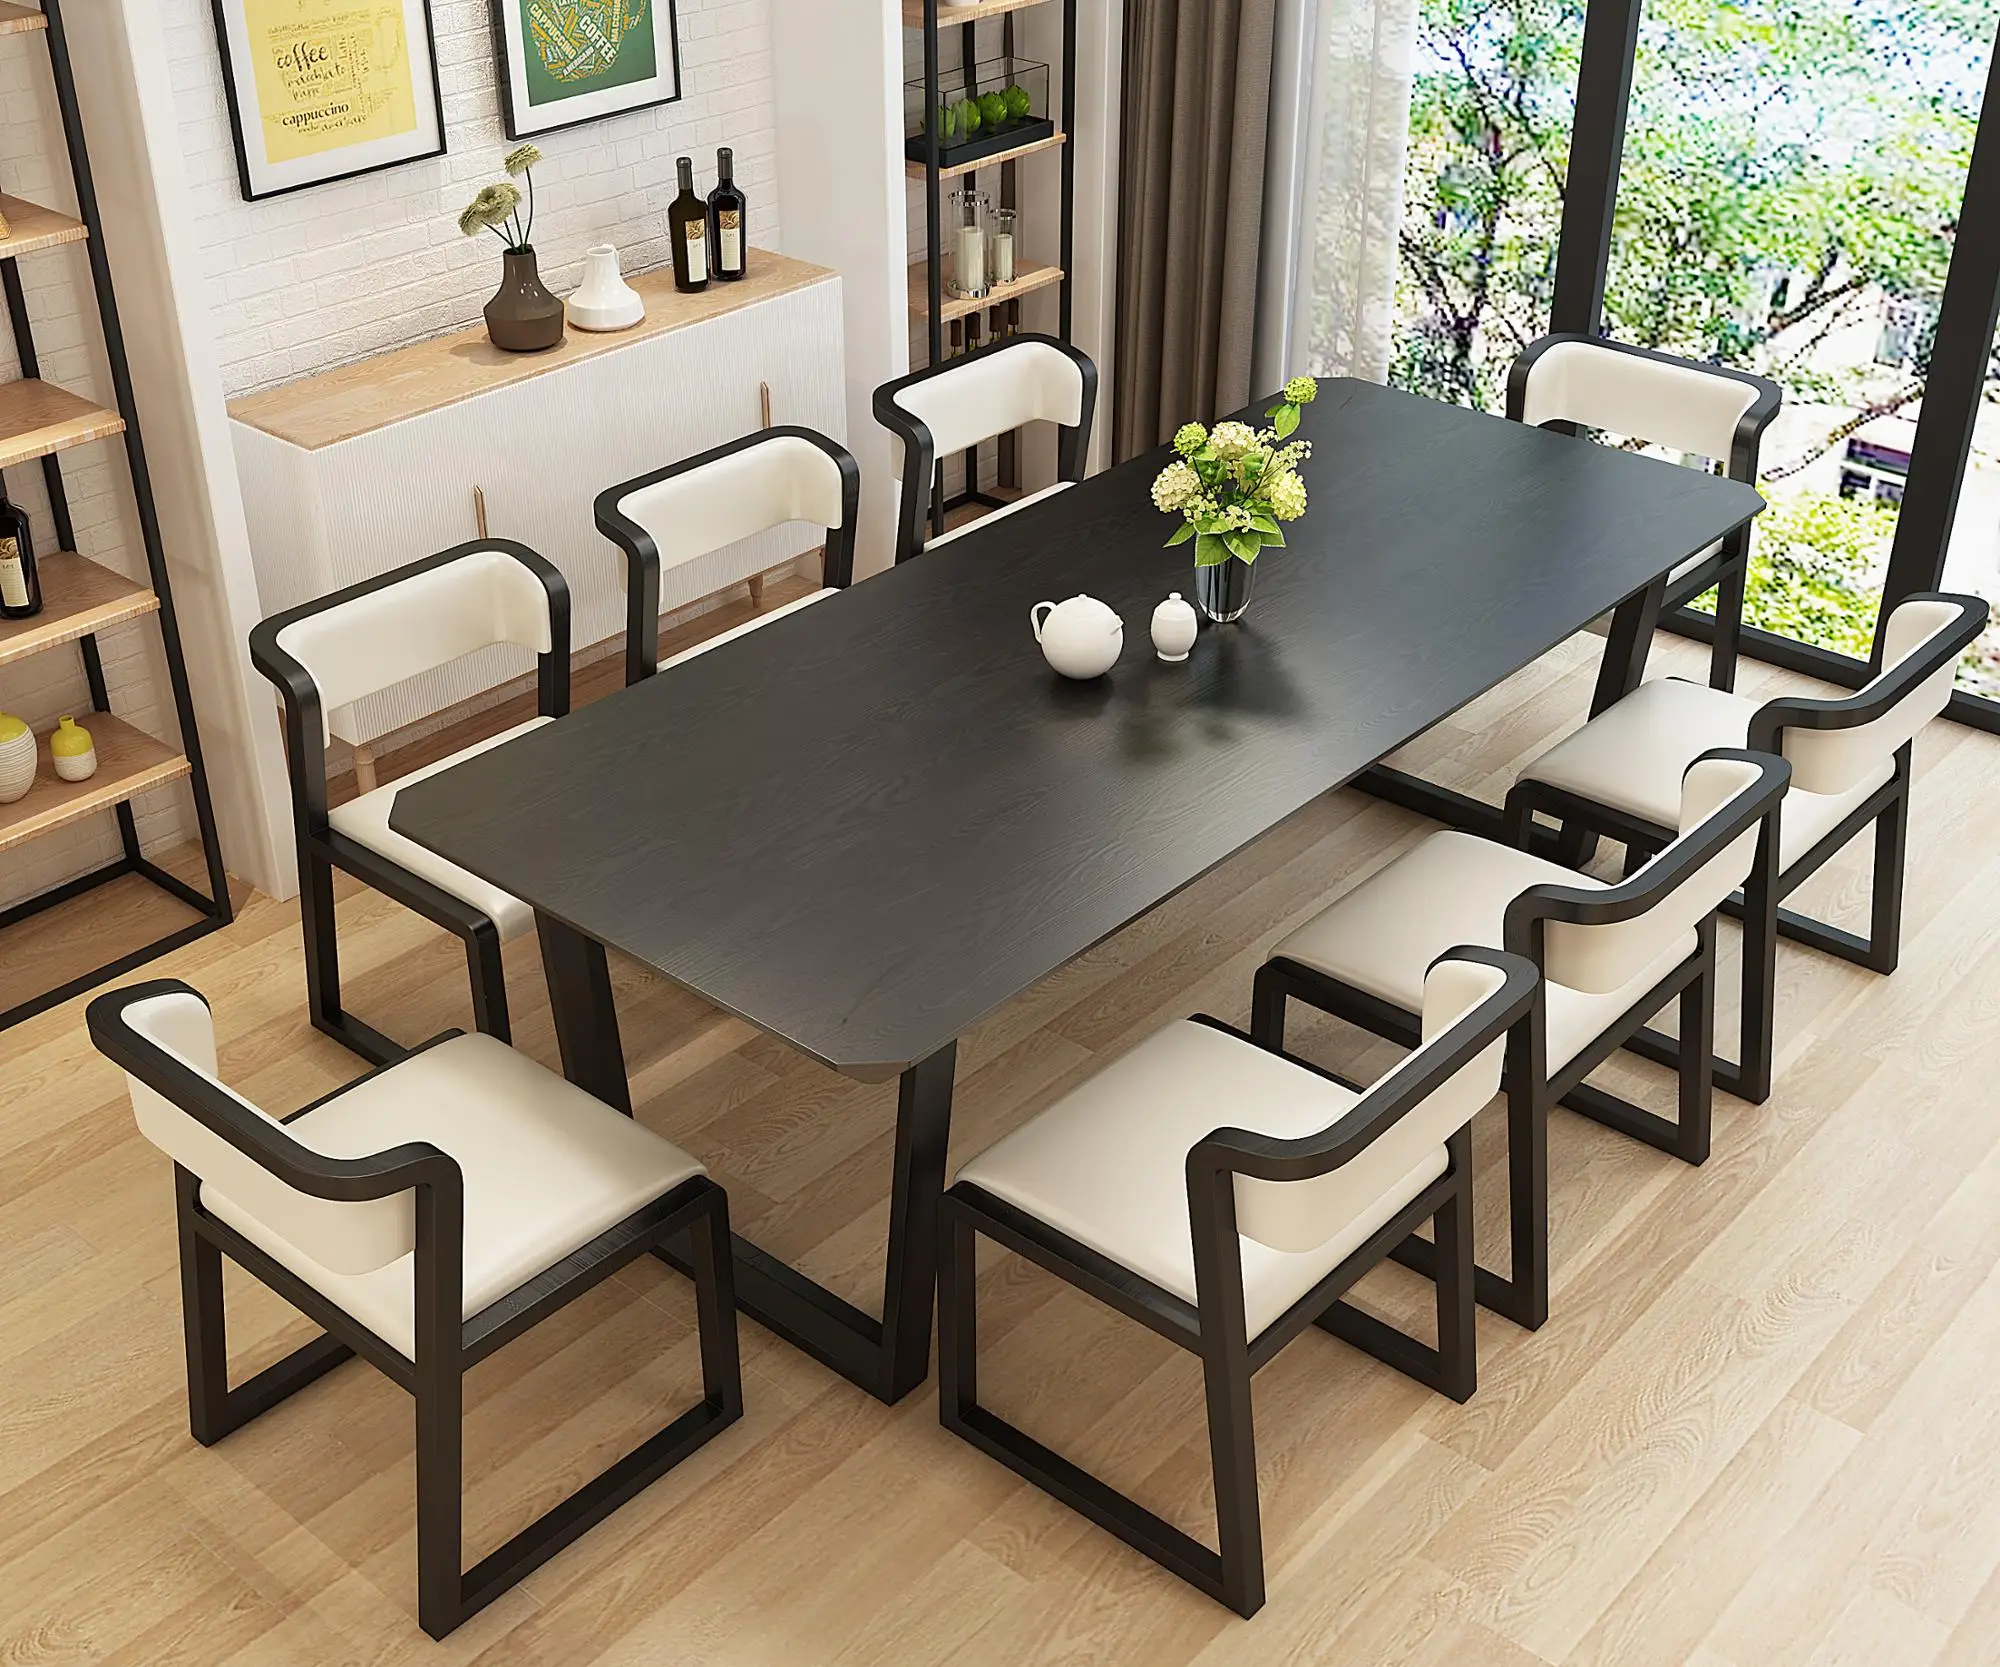 Modern Design 8 Seater Dining Table Set - Buy 8 Seater Dining Table